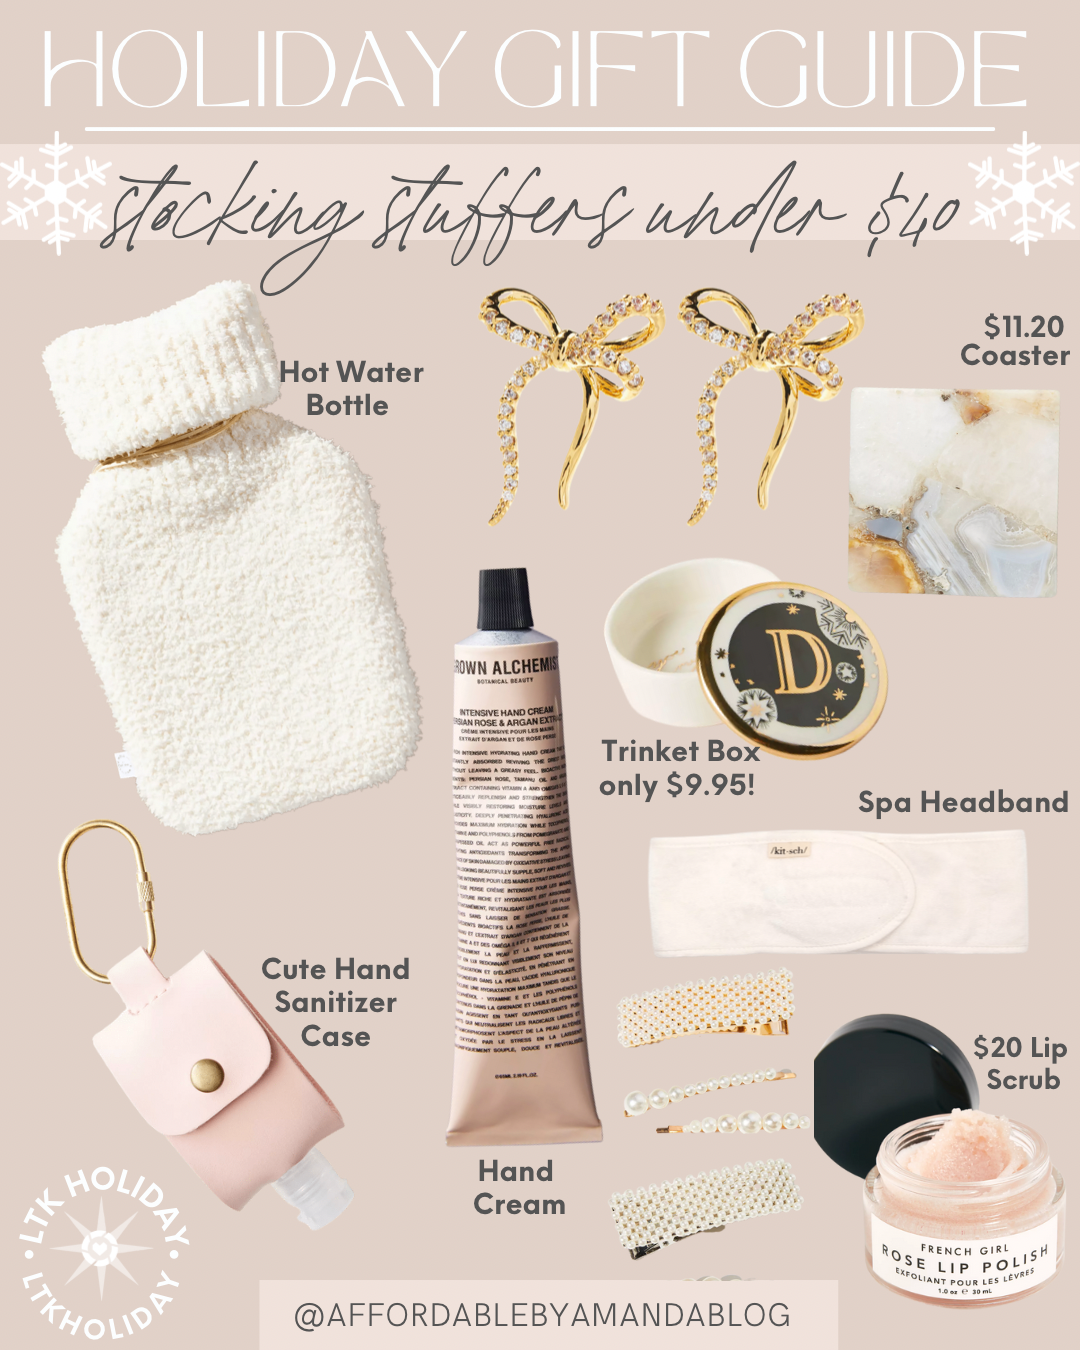 The Best Stocking Stuffers For Her Under $10, Holidays